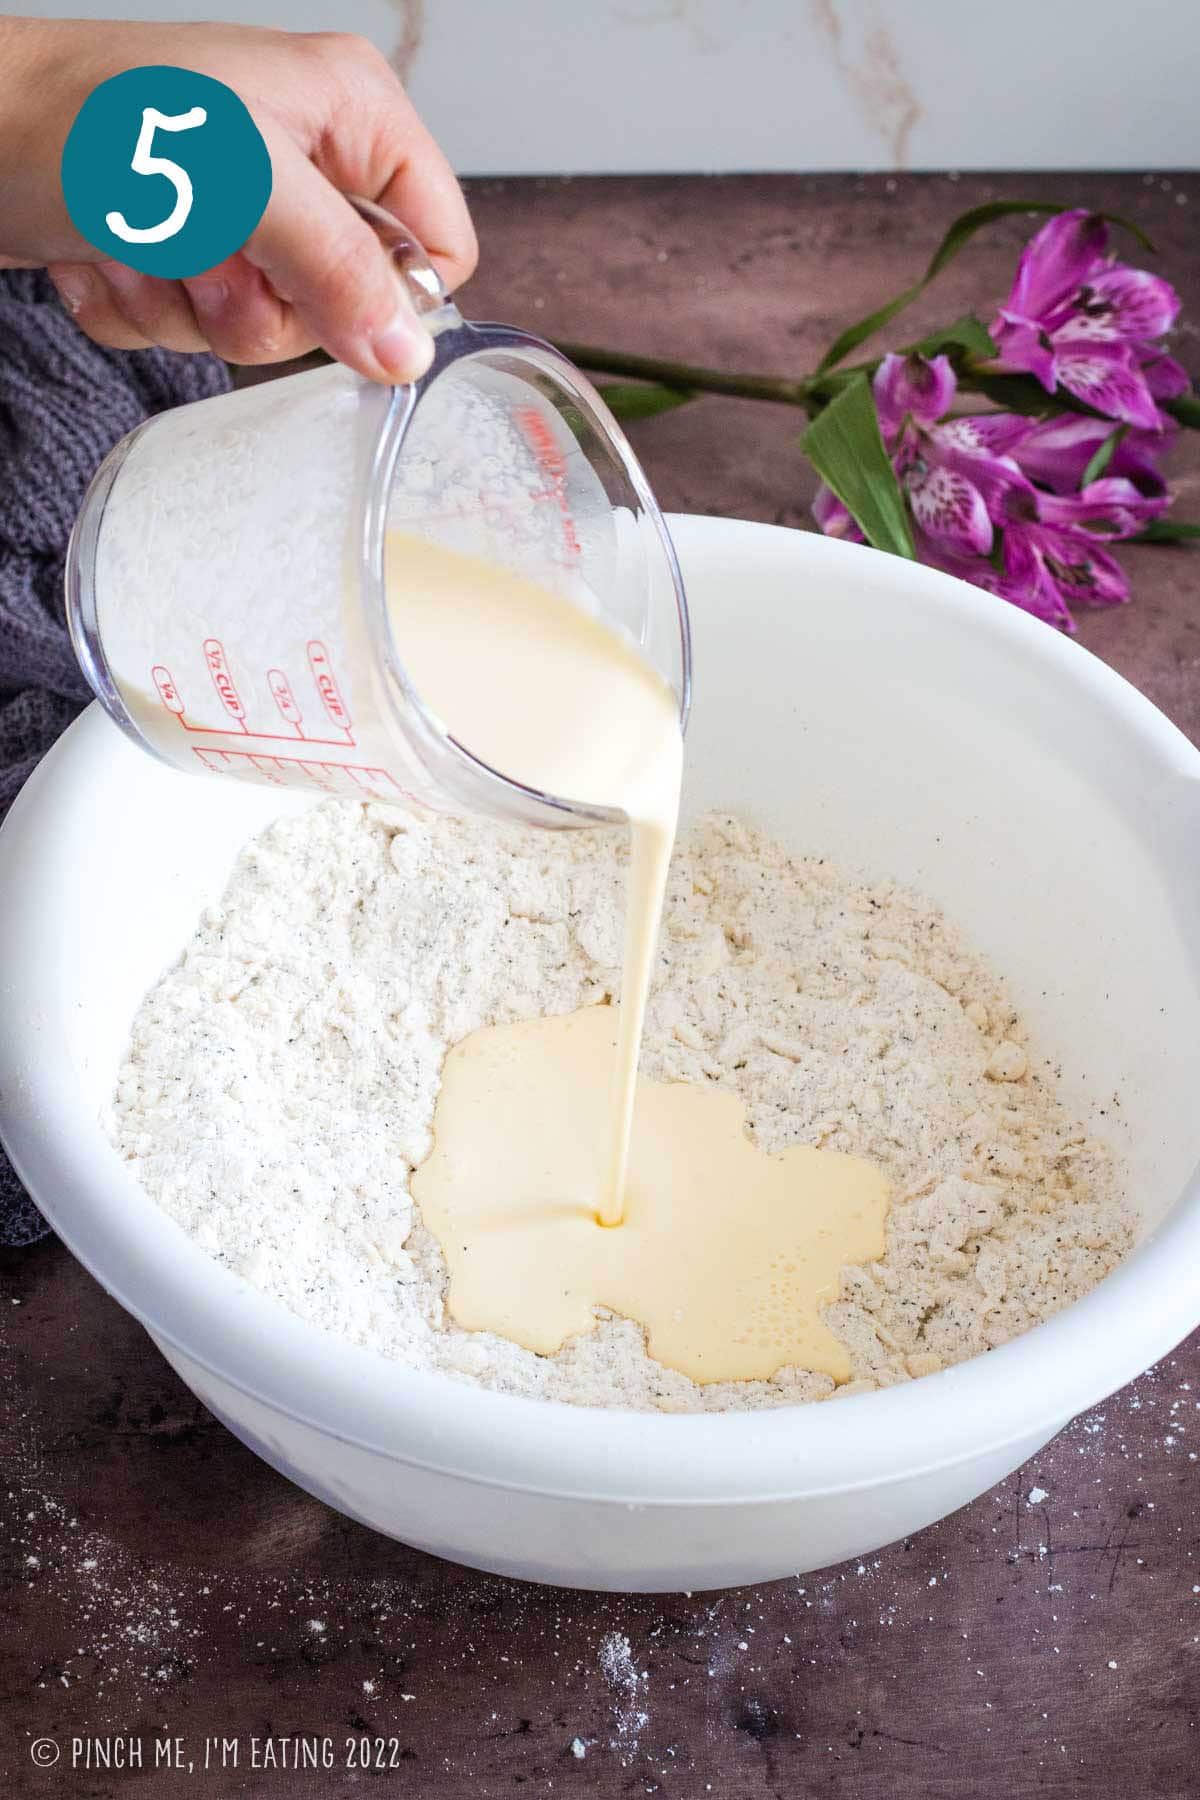 Pouring wet ingredients into flour and butter mixture for scones.